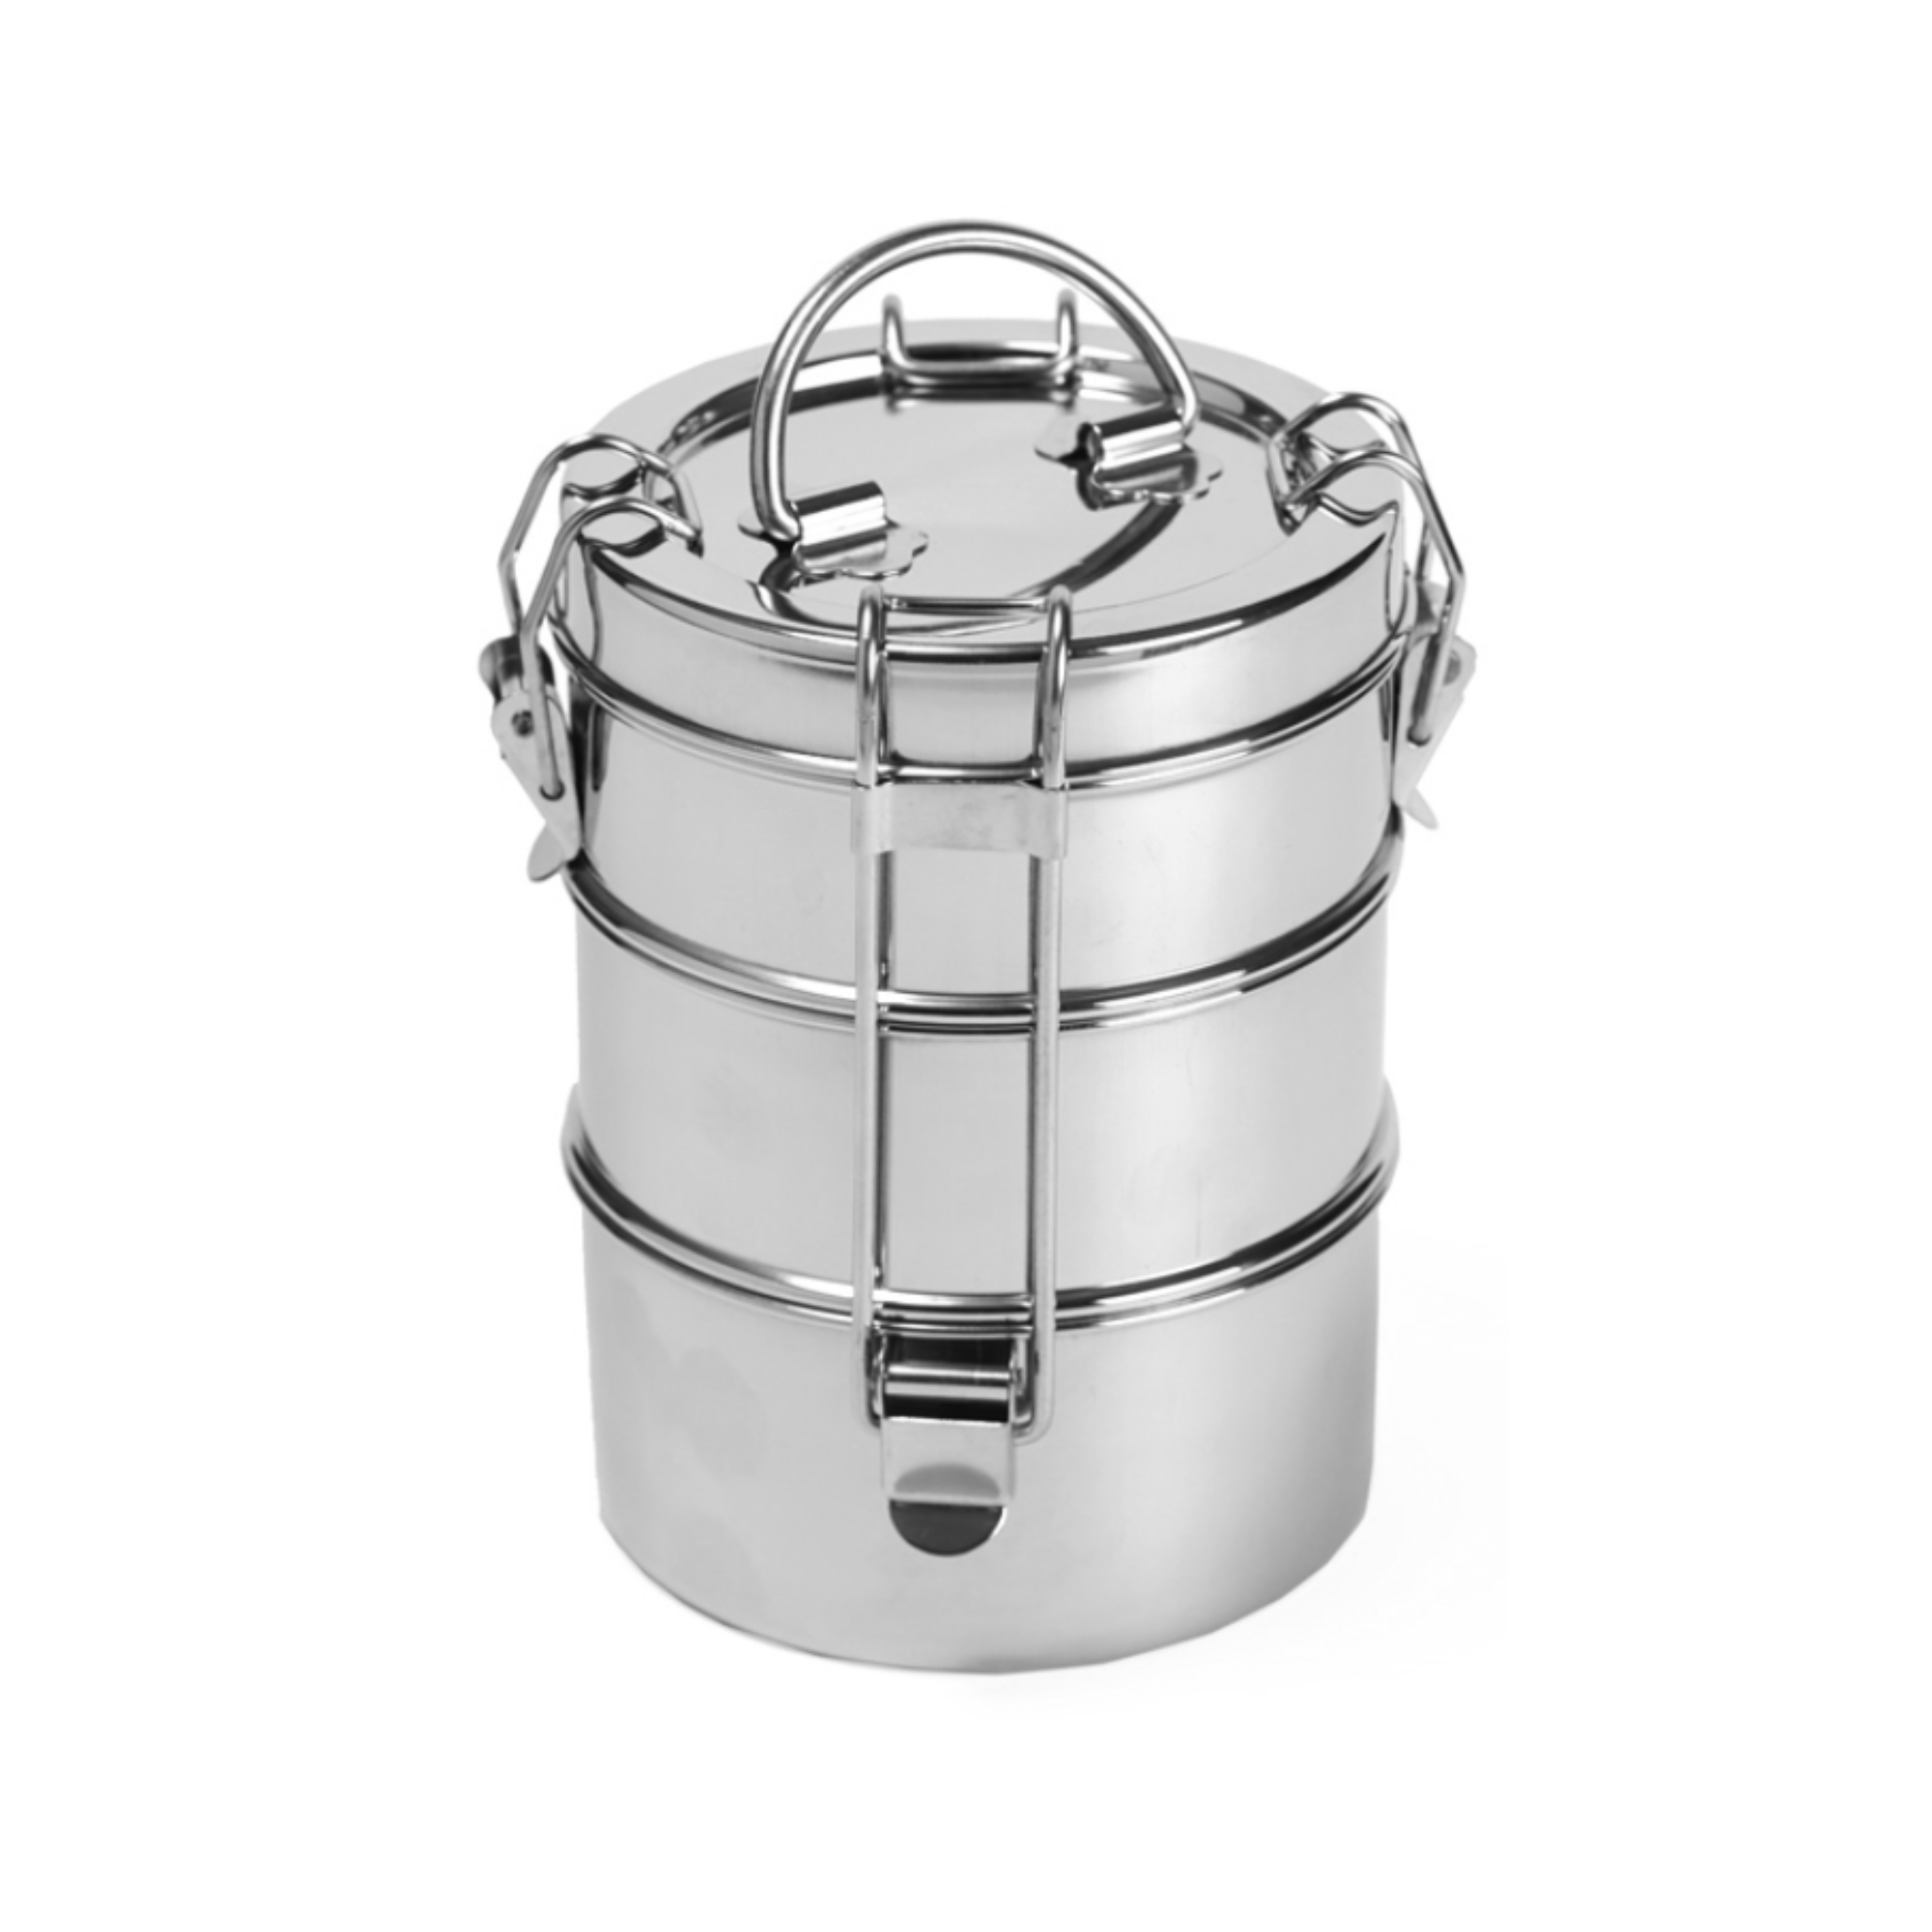 Stainless Steel Lunch Box, 3 Tier Leak Proof, 3 Compartments, 75 oz